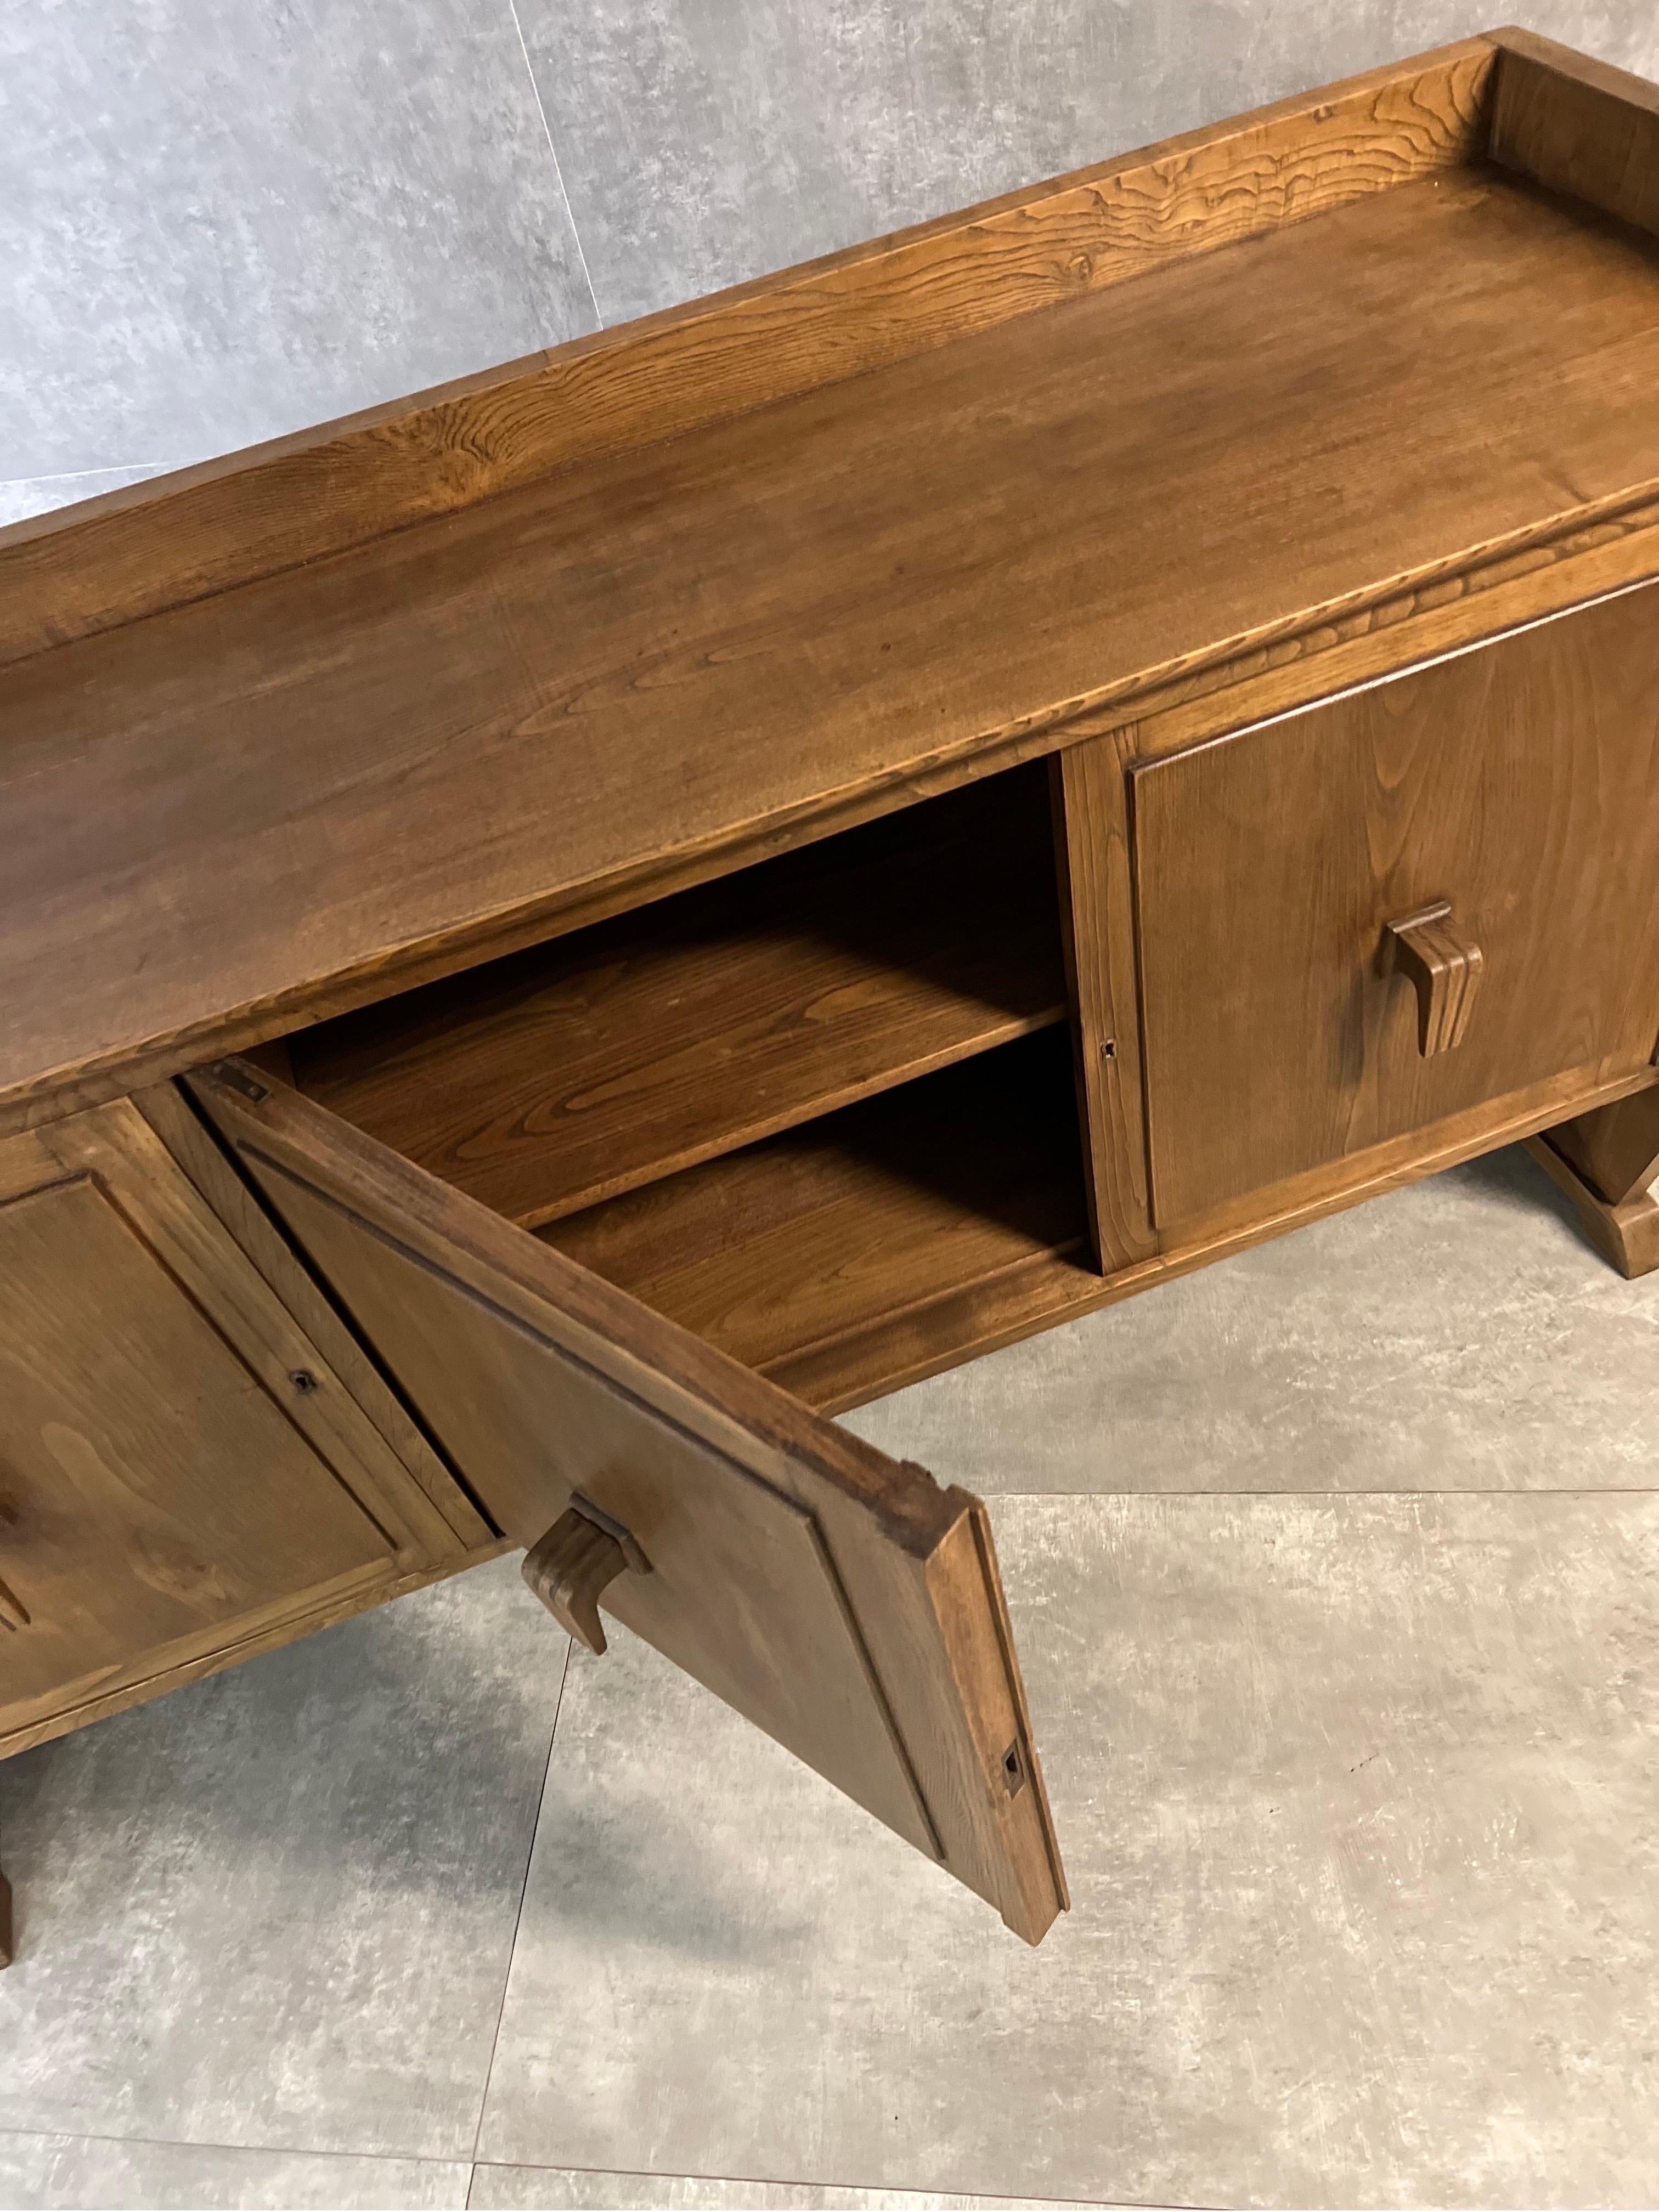 1930s sideboard made of chestnut wood, designed by Gherardo Bosio.
Its doors contains 3 drawers on one side, and a shelf on the other and features externally 3 beautiful-detailed handlers. Chestwood wood give to this sideaboard an excellent texture